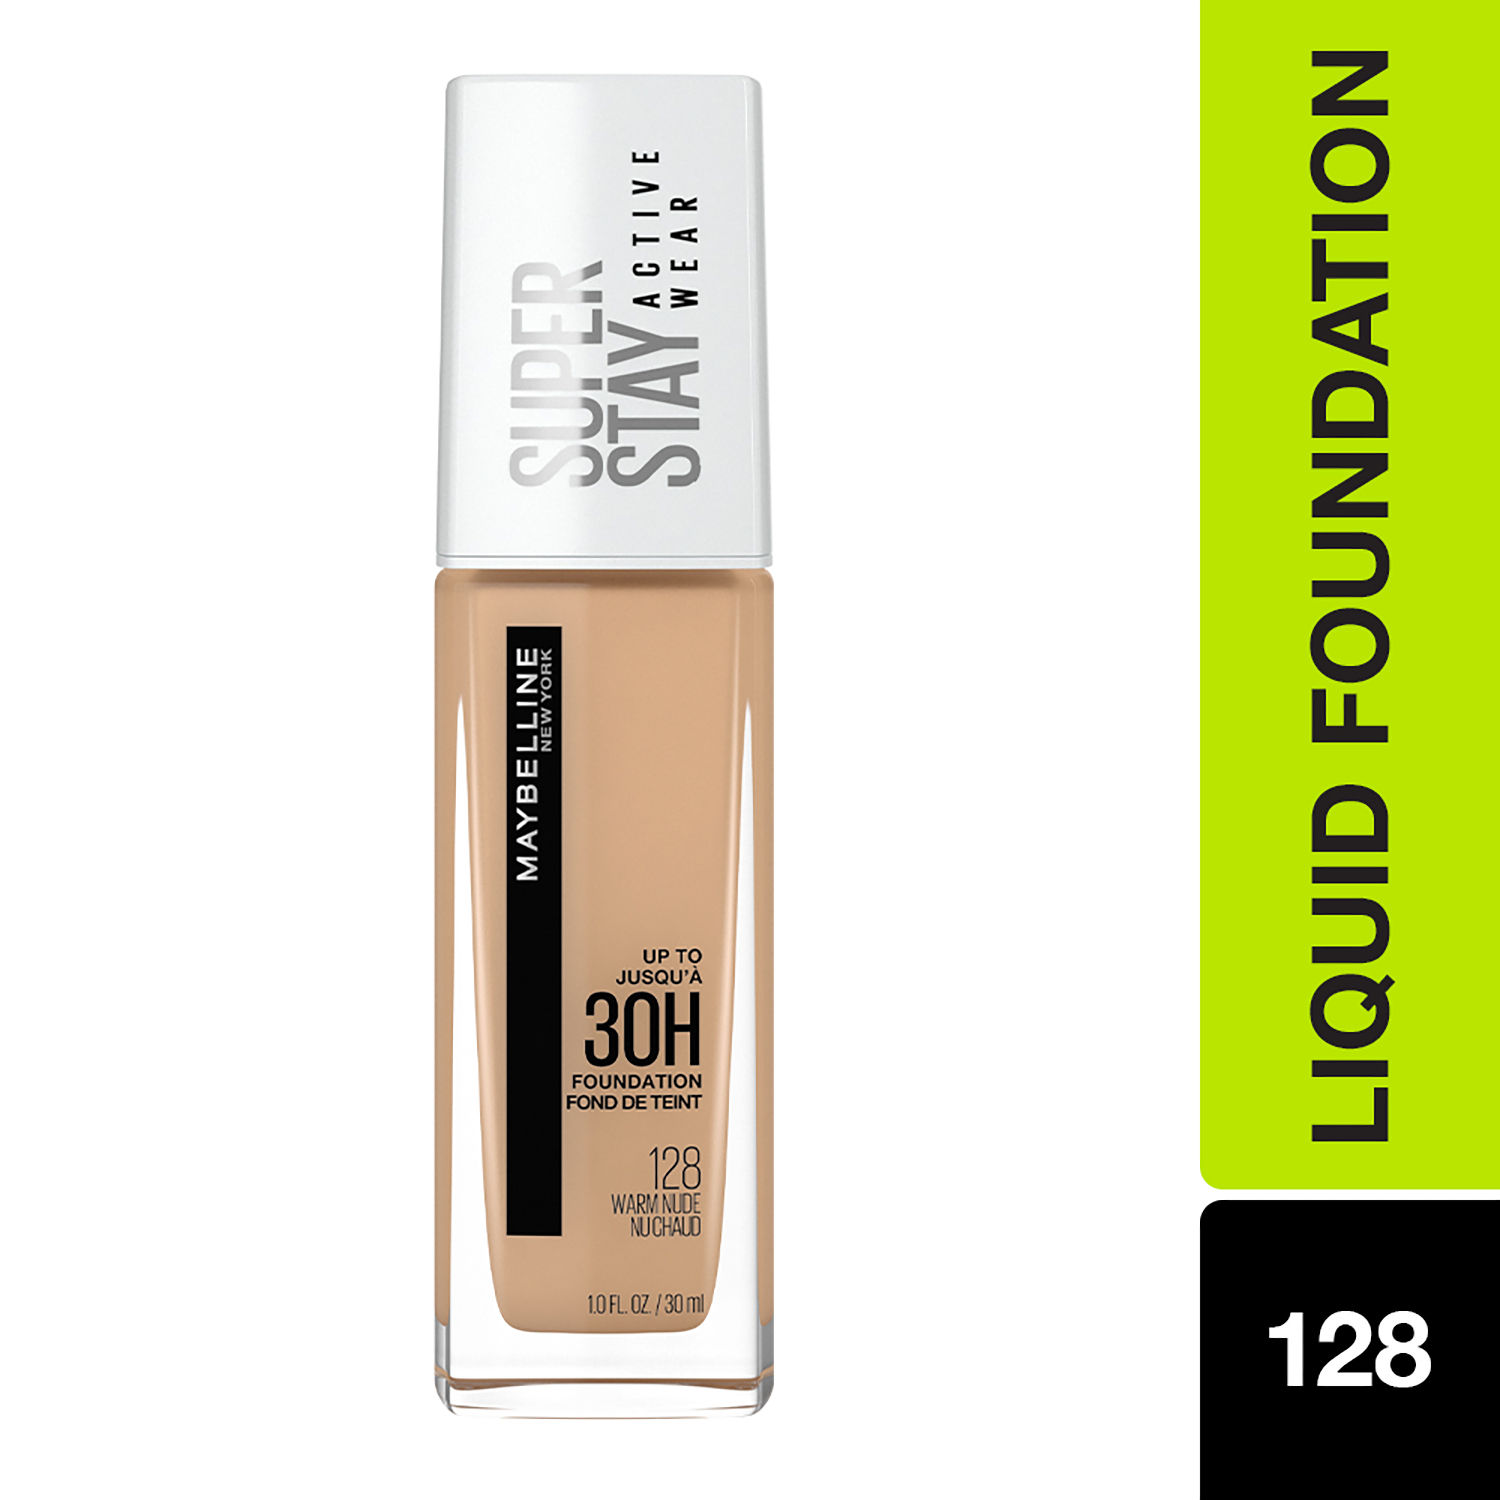 Maybelline New York Super Stay Full Coverage Active Wear Liquid Foundation,  Matte Finish with 30 HR Wear, Transfer Proof, 128, Warm Nude, 30ml